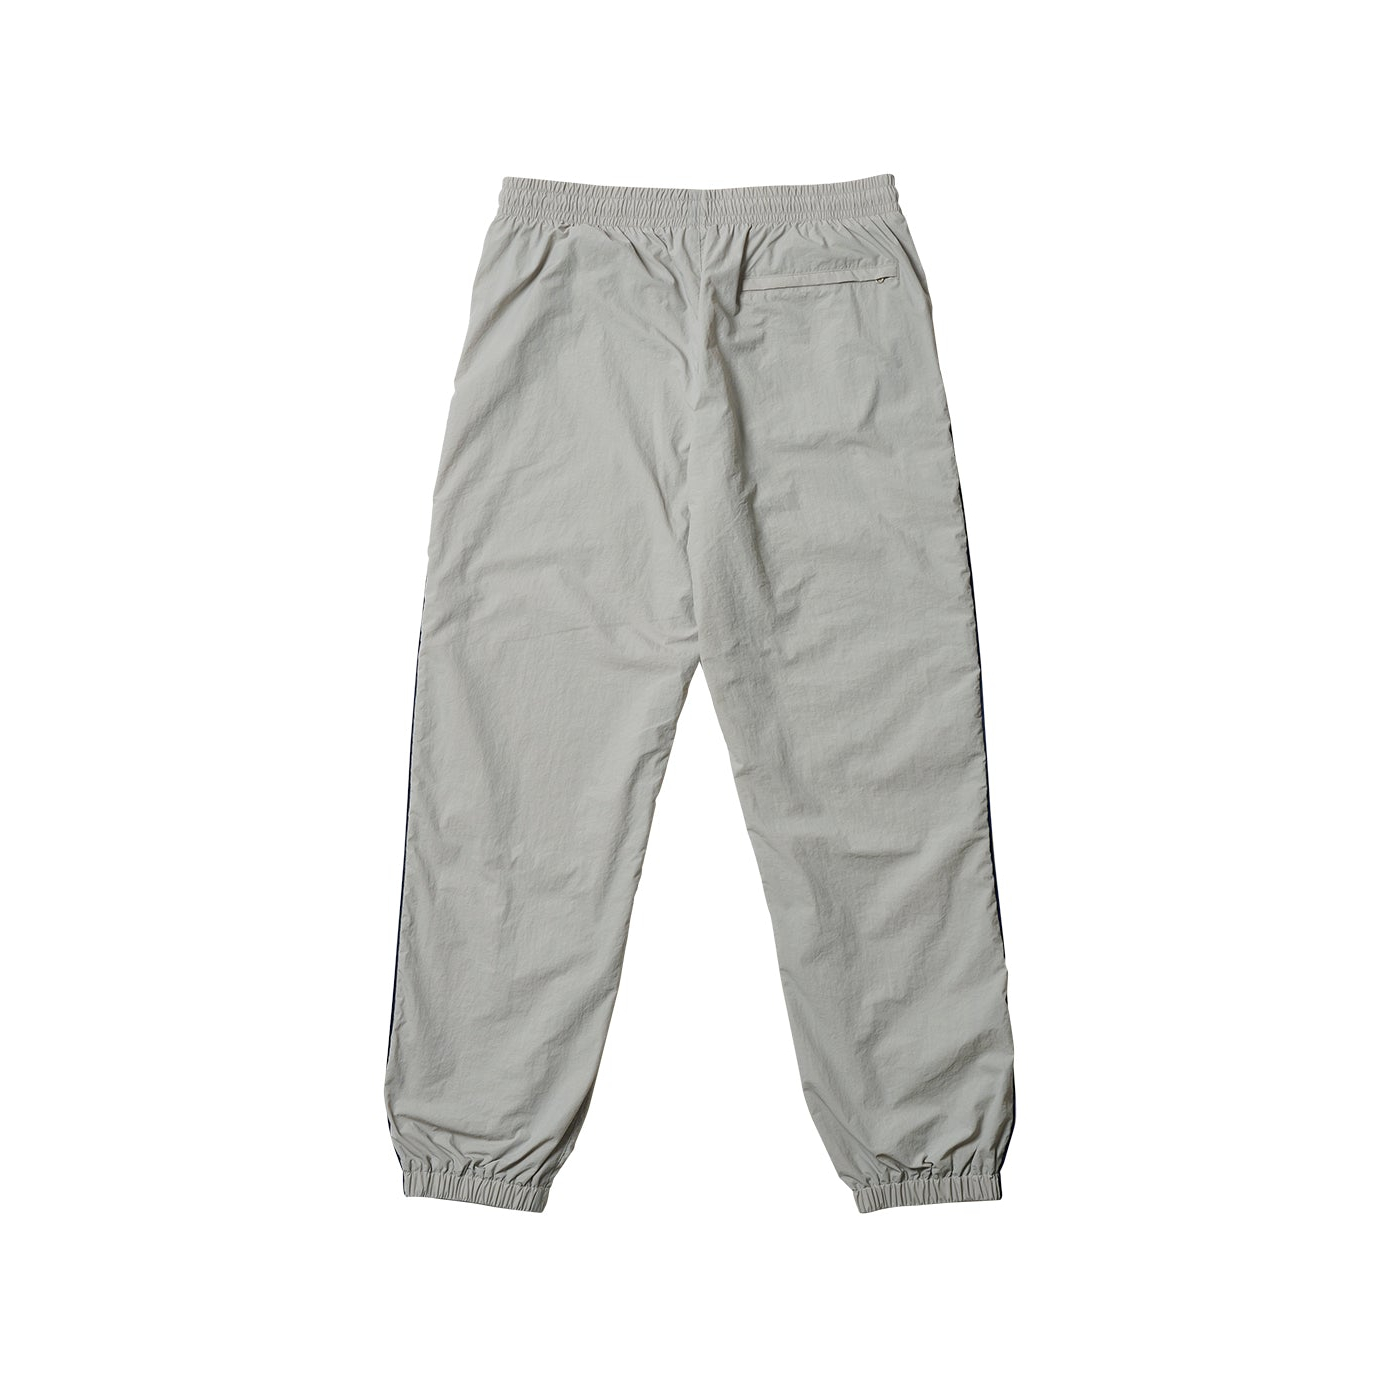 Thumbnail PIPED SHELL JOGGER GREY one color